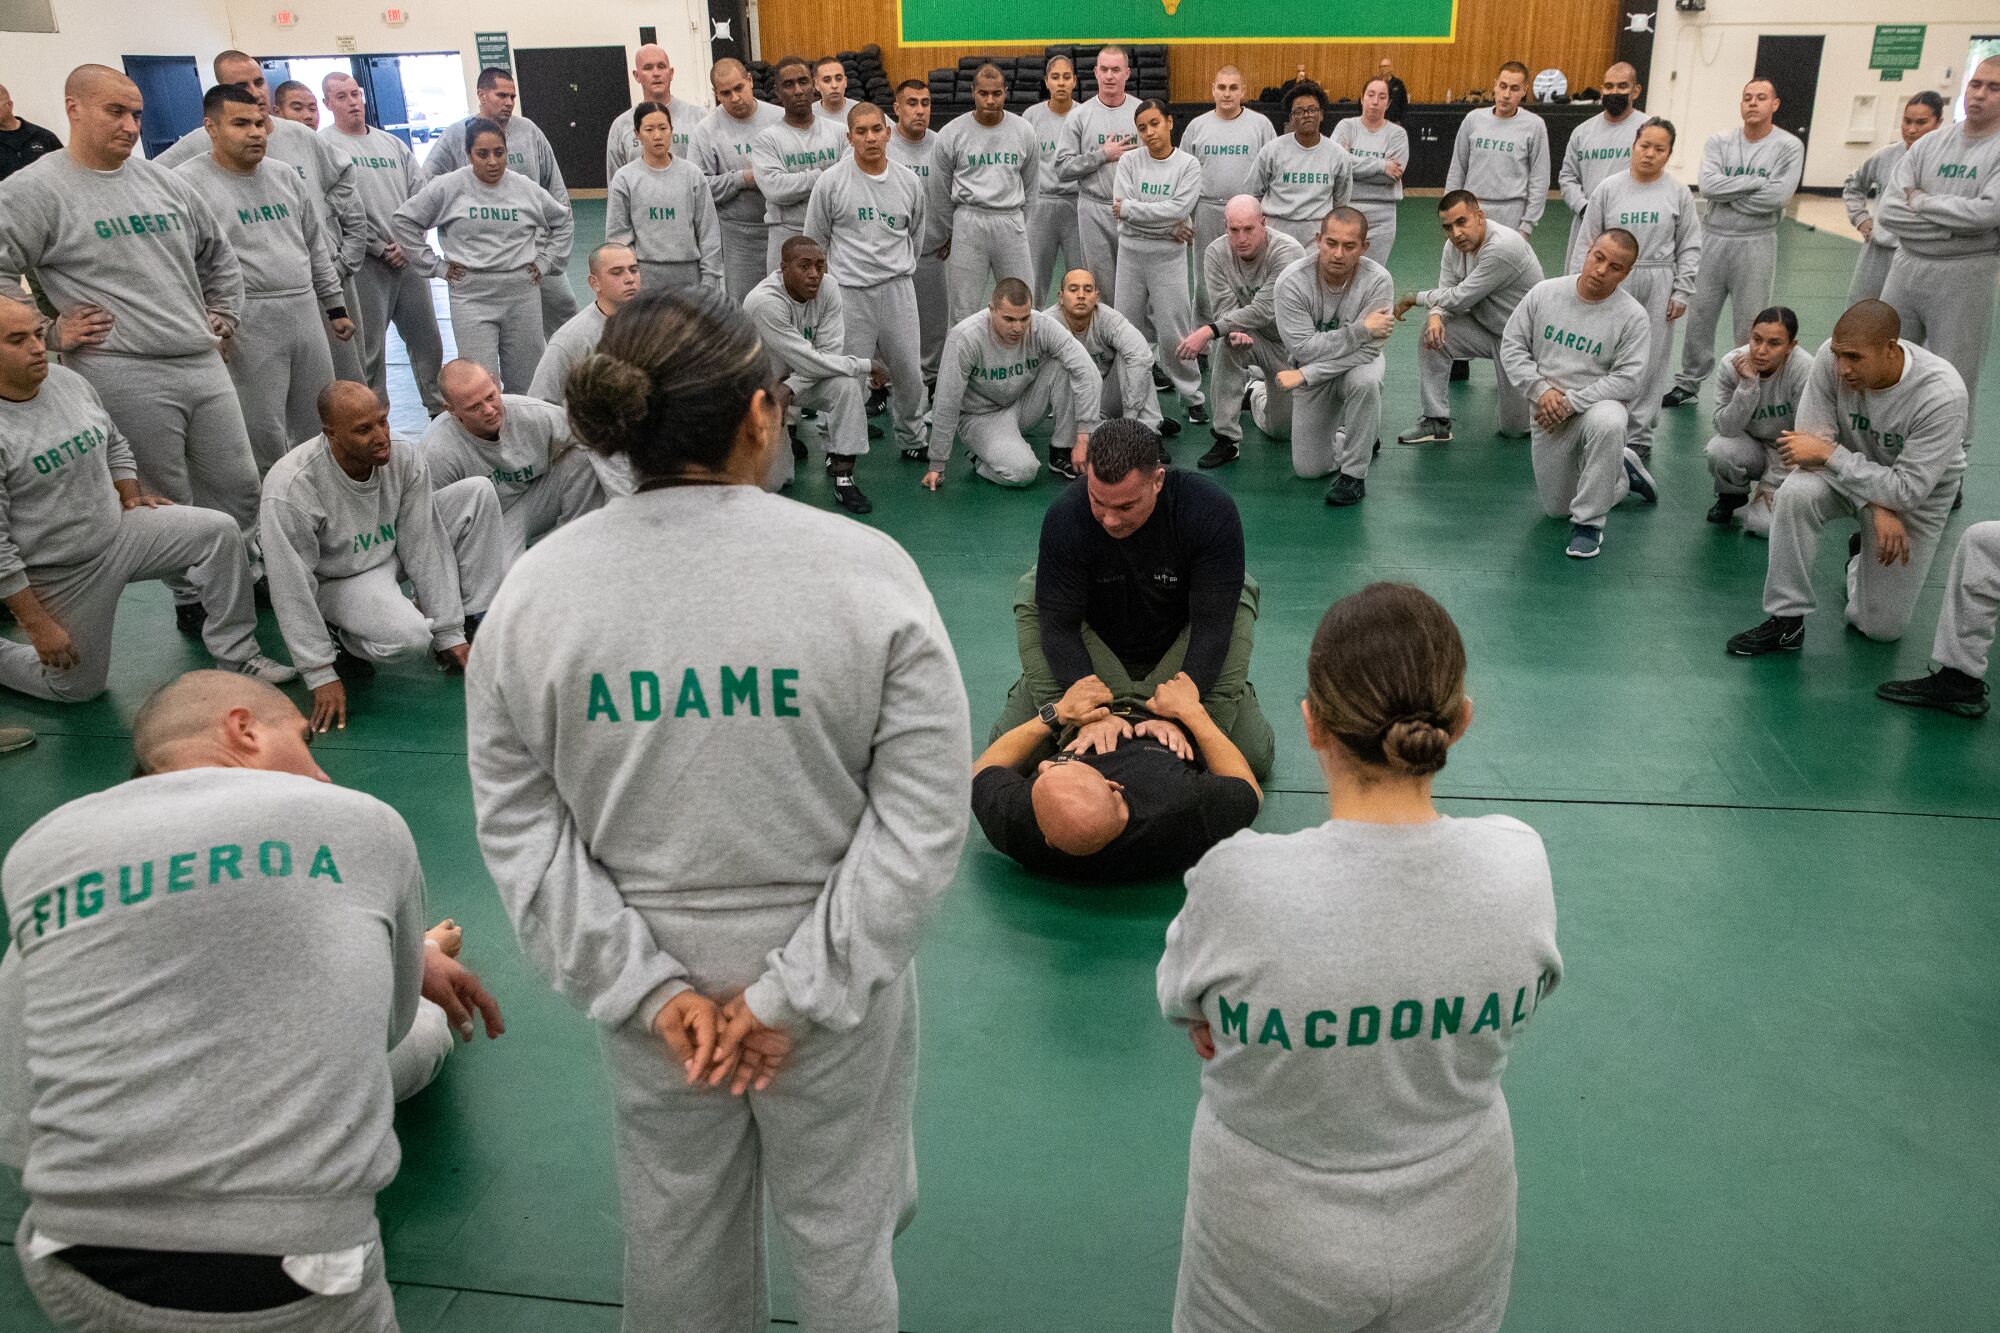 Deputy demonstrates how to physically control a person during a defensive tactics class at STAR Center Academy in Whittier.